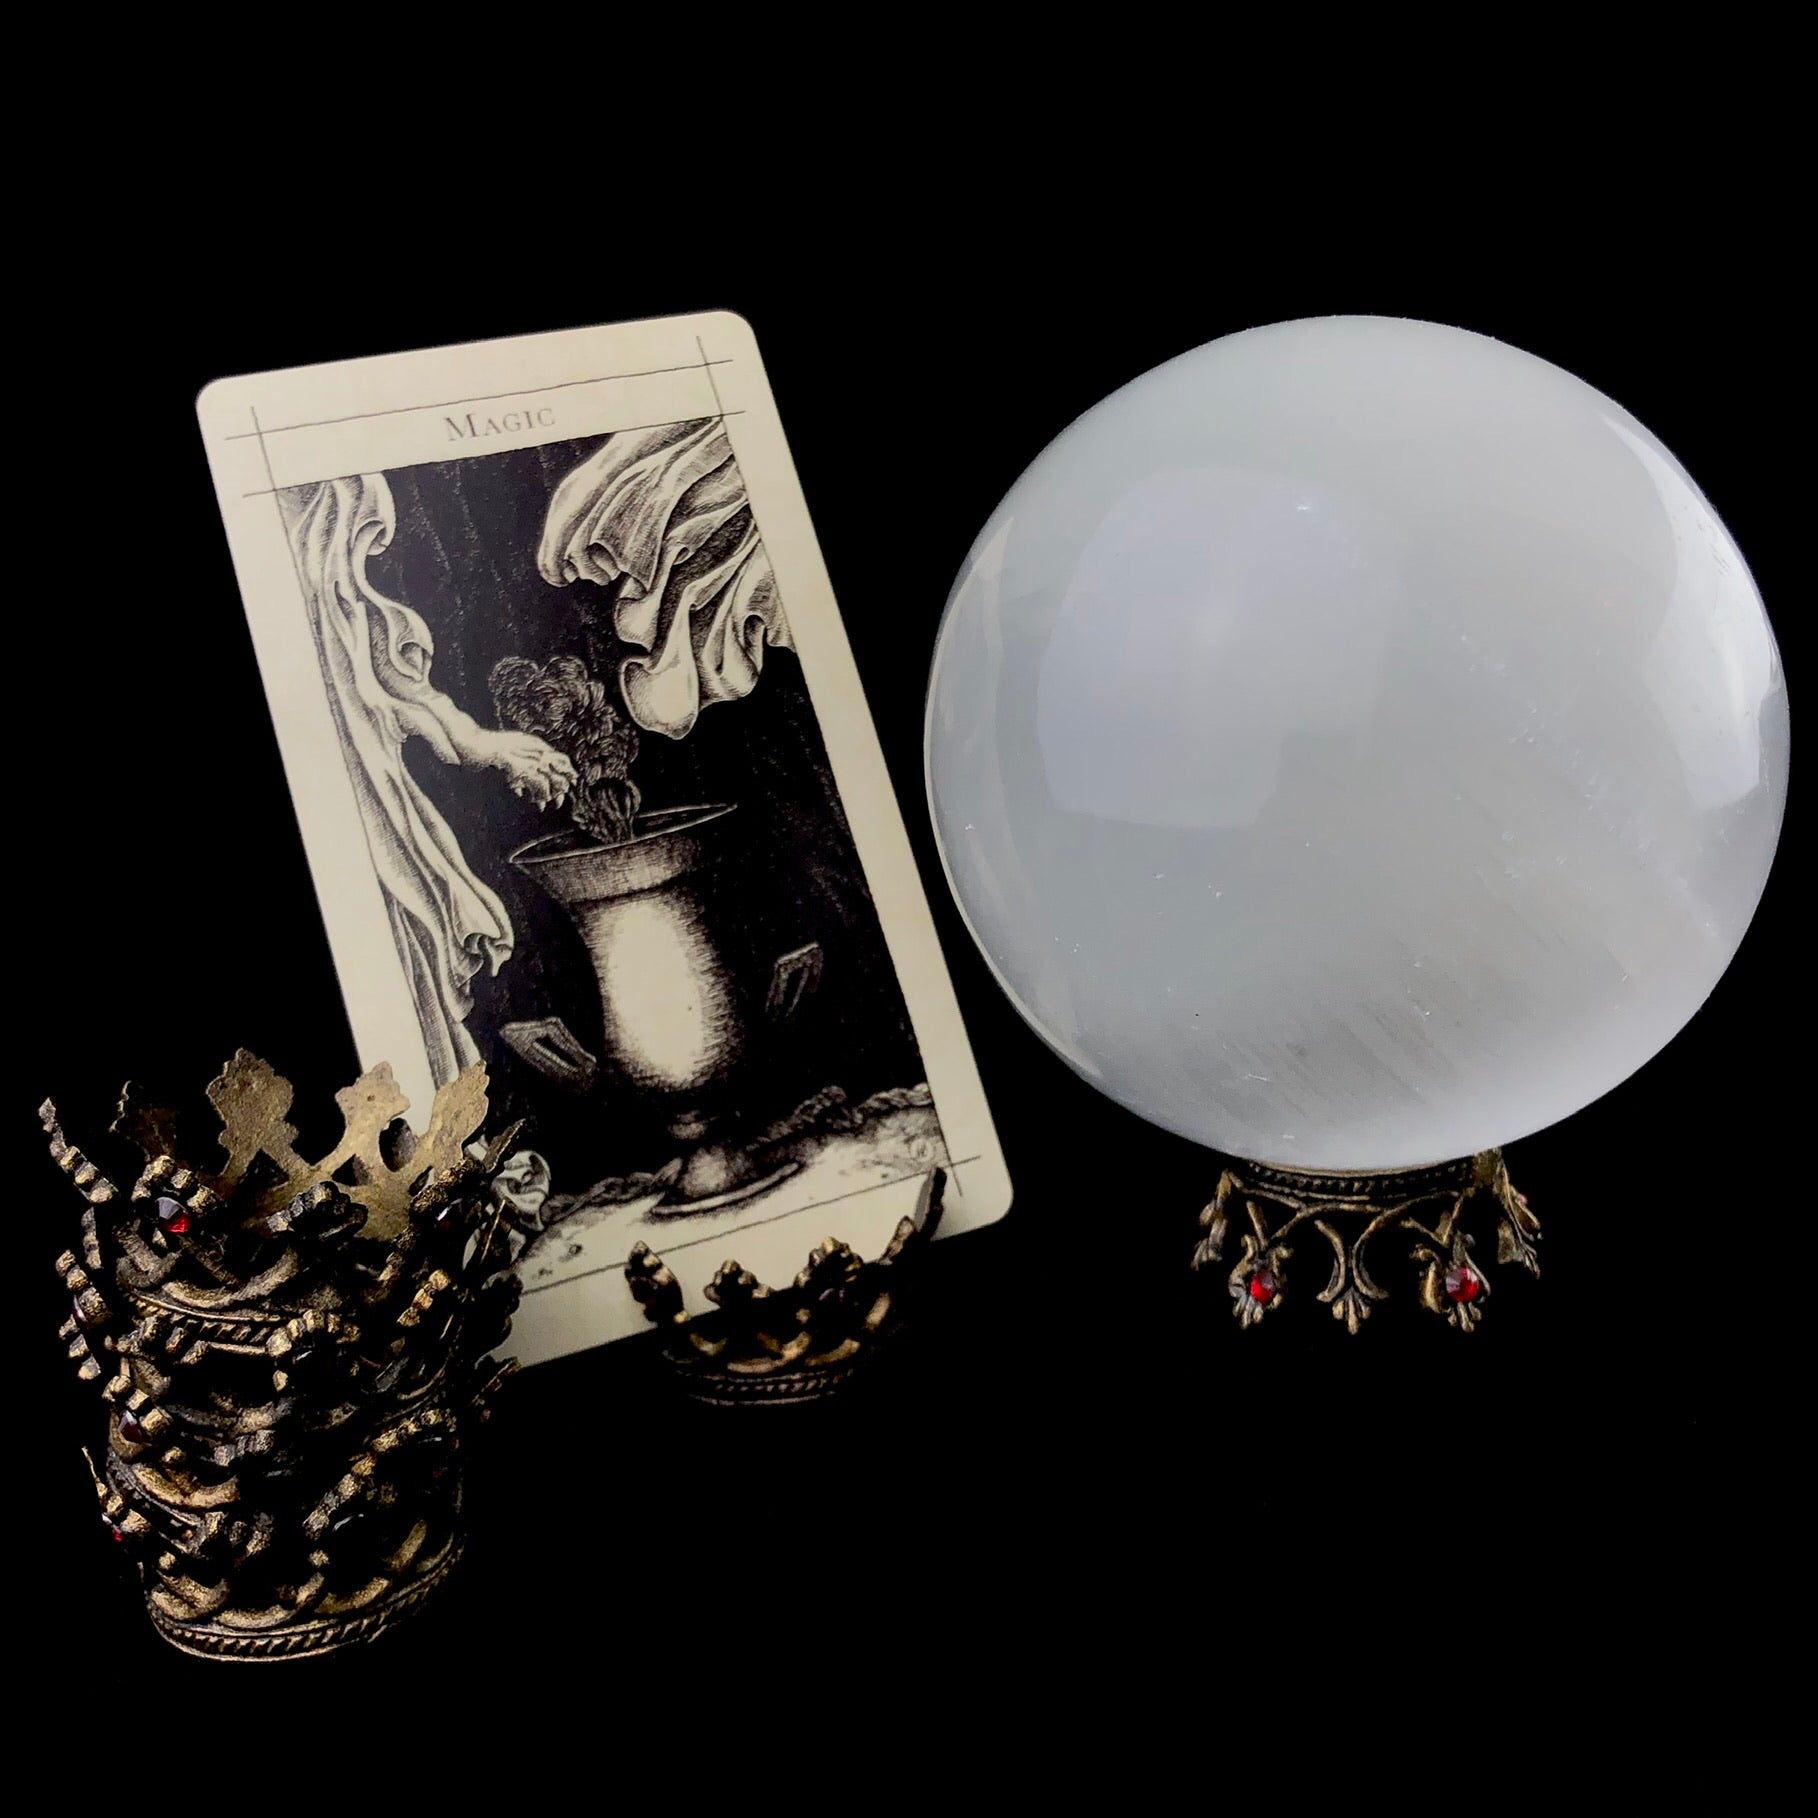 Collection of Mini Crowns shown in a stack, as a card holder with a Supra tarot, and used as a stand/pedestal holding a Selenite Orb